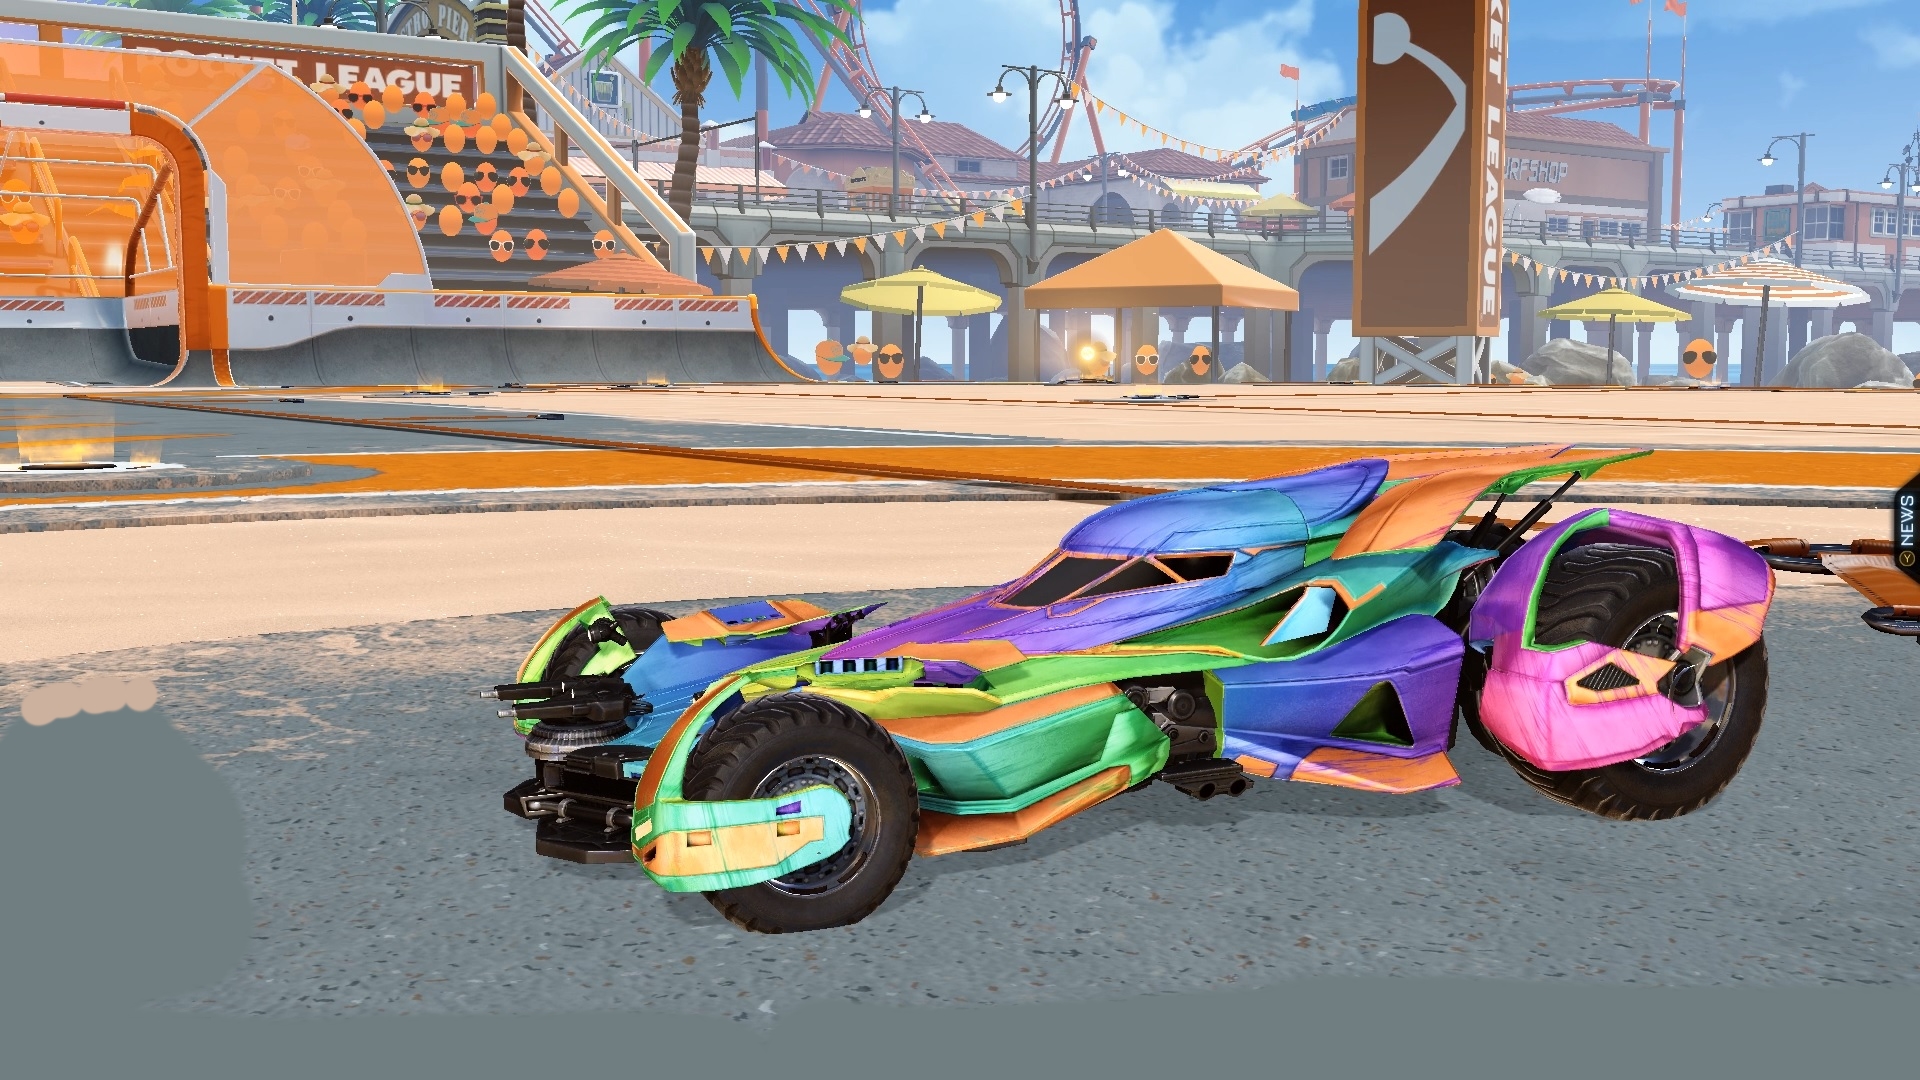 Mods Pack 1 | Rainbow decal | Transparent boost | New banners